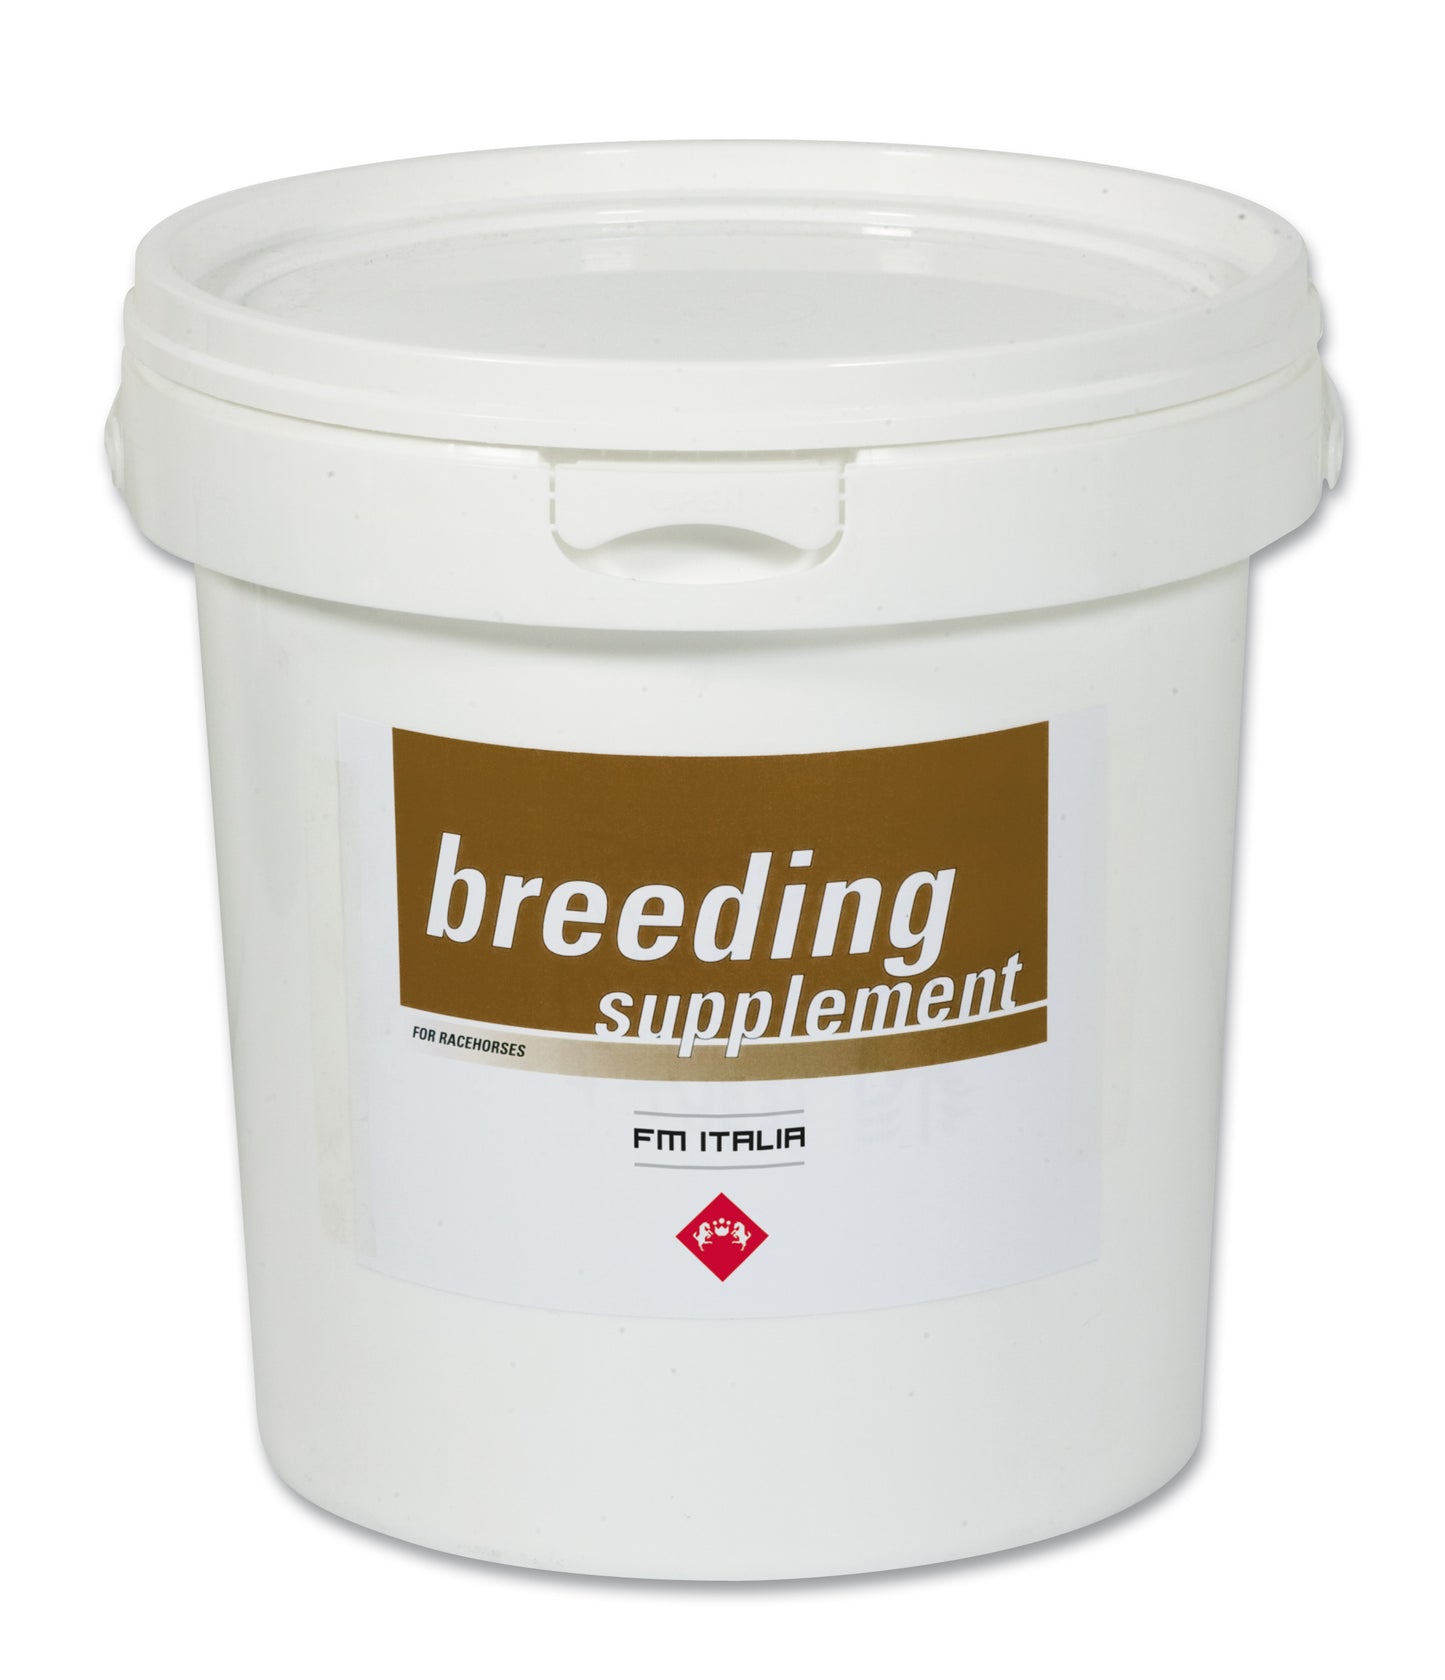 BREEDING SUPPLEMENT | Powder Complementary Feed for Calcium and Amino Acid Integration